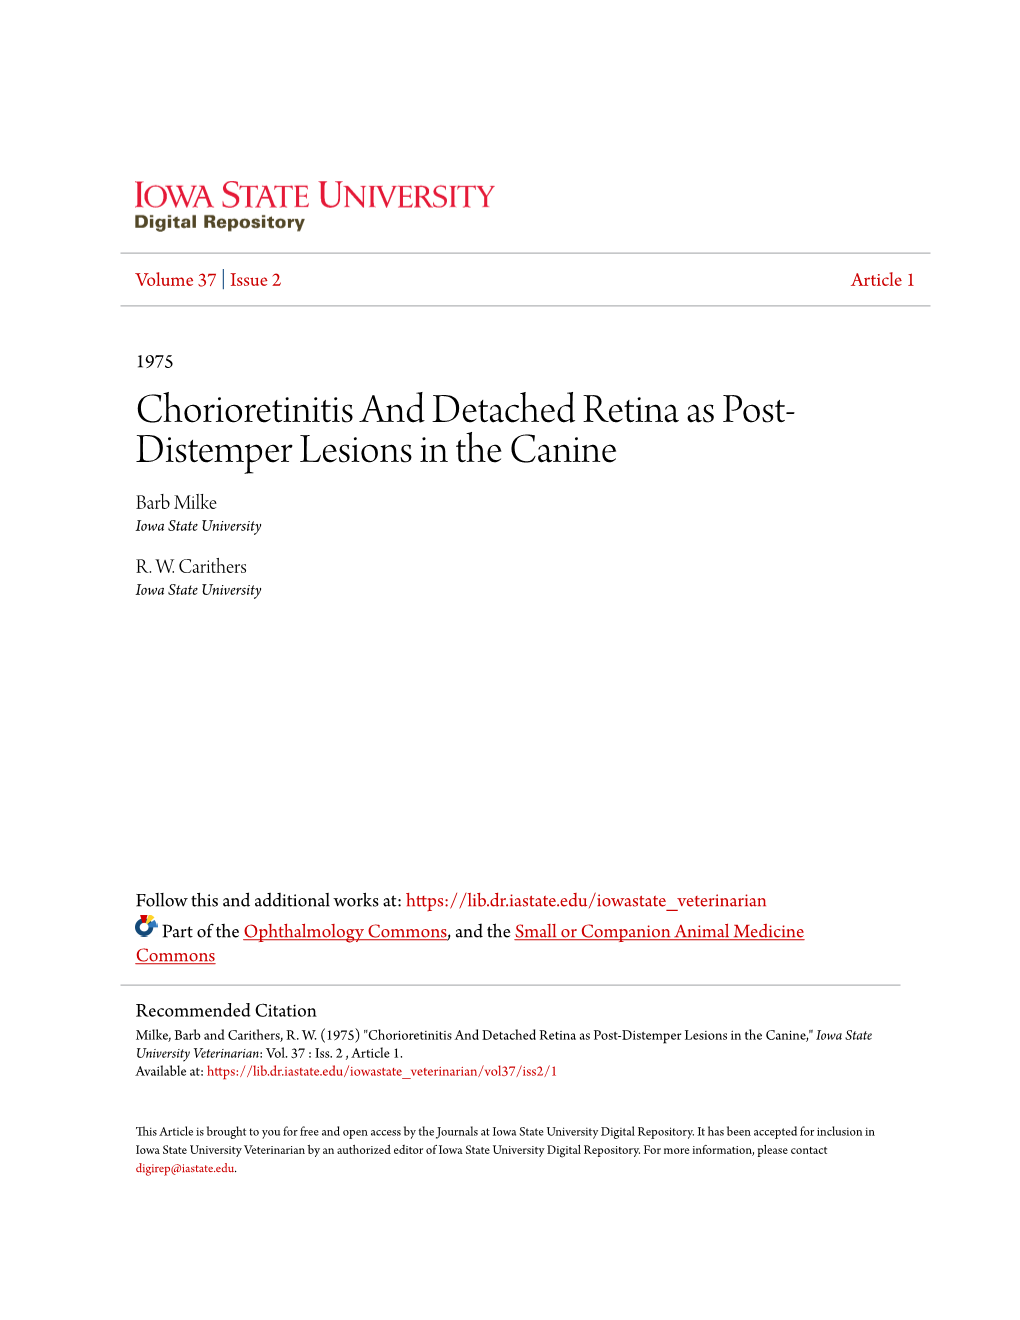 Chorioretinitis and Detached Retina As Post-Distemper Lesions in the Canine," Iowa State University Veterinarian: Vol